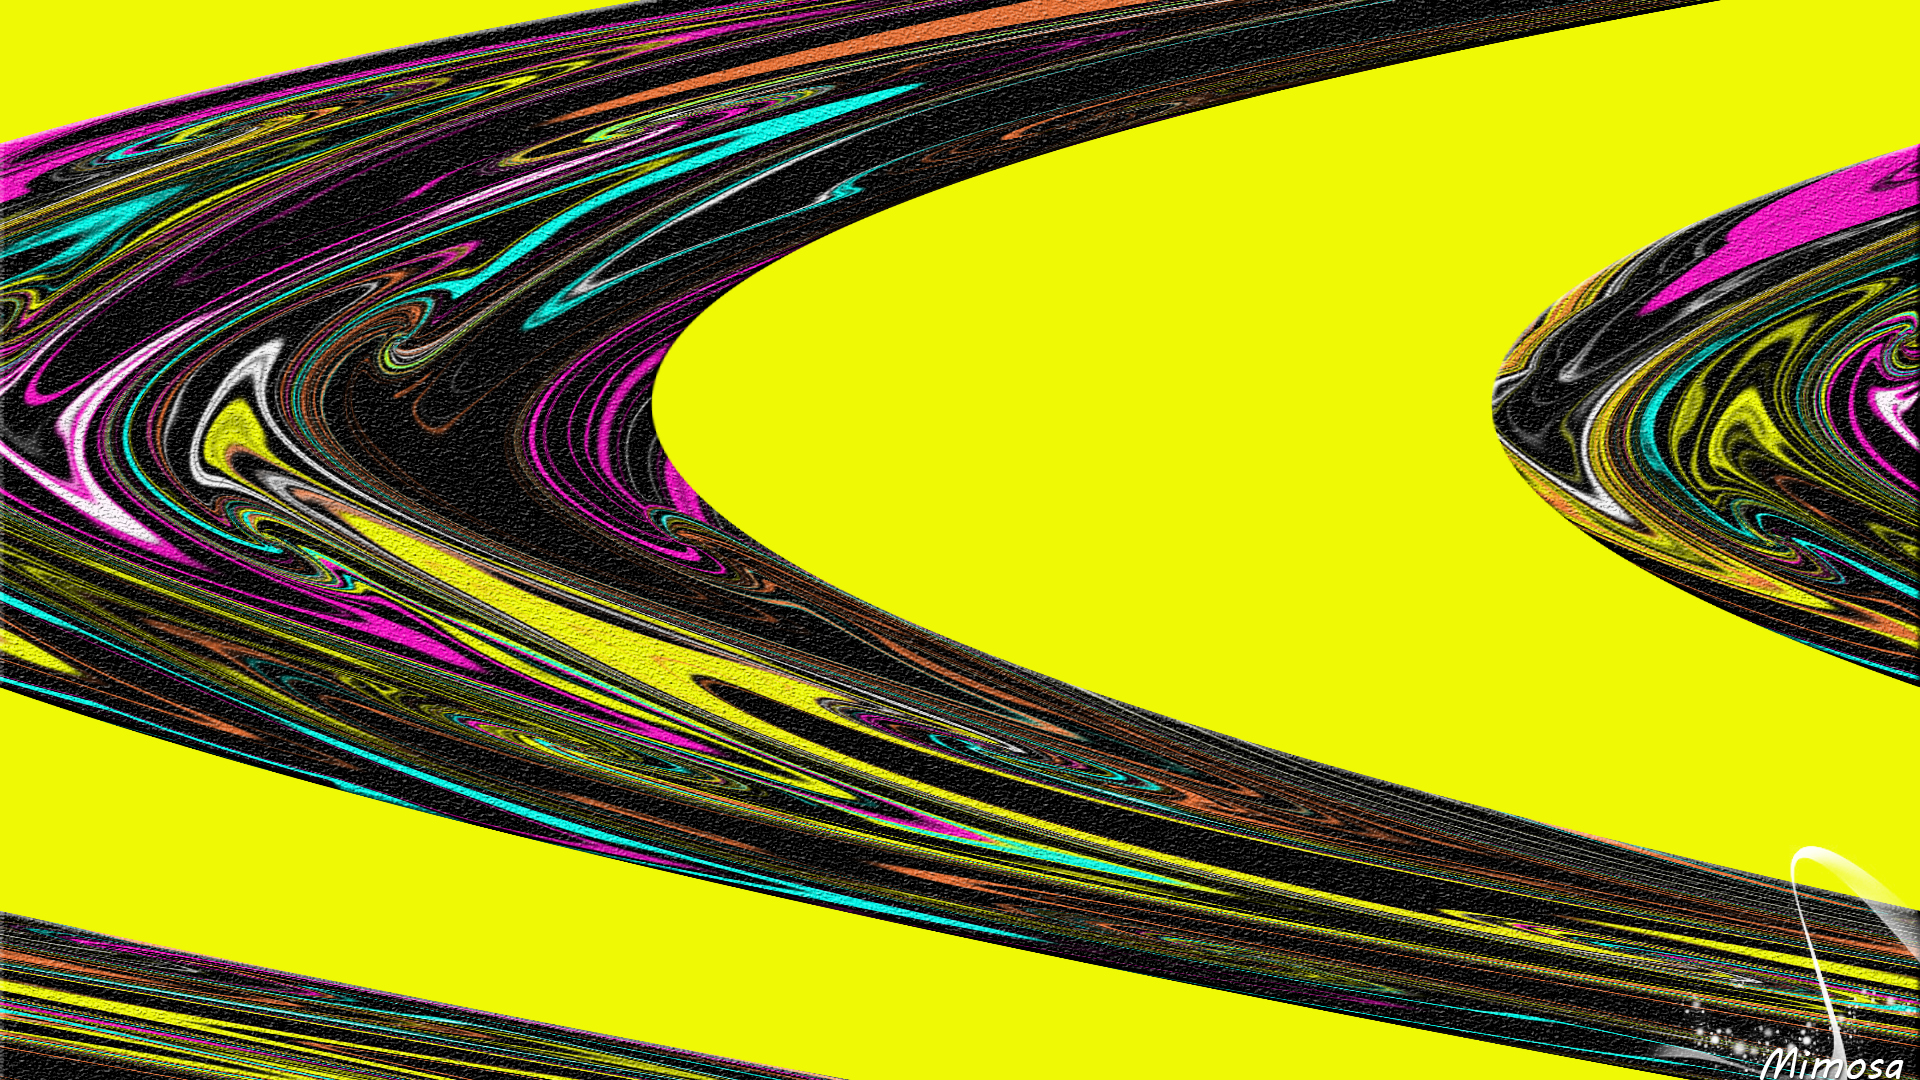 Abstract Artistic Colors Curves Digital Art Yellow 1920x1080